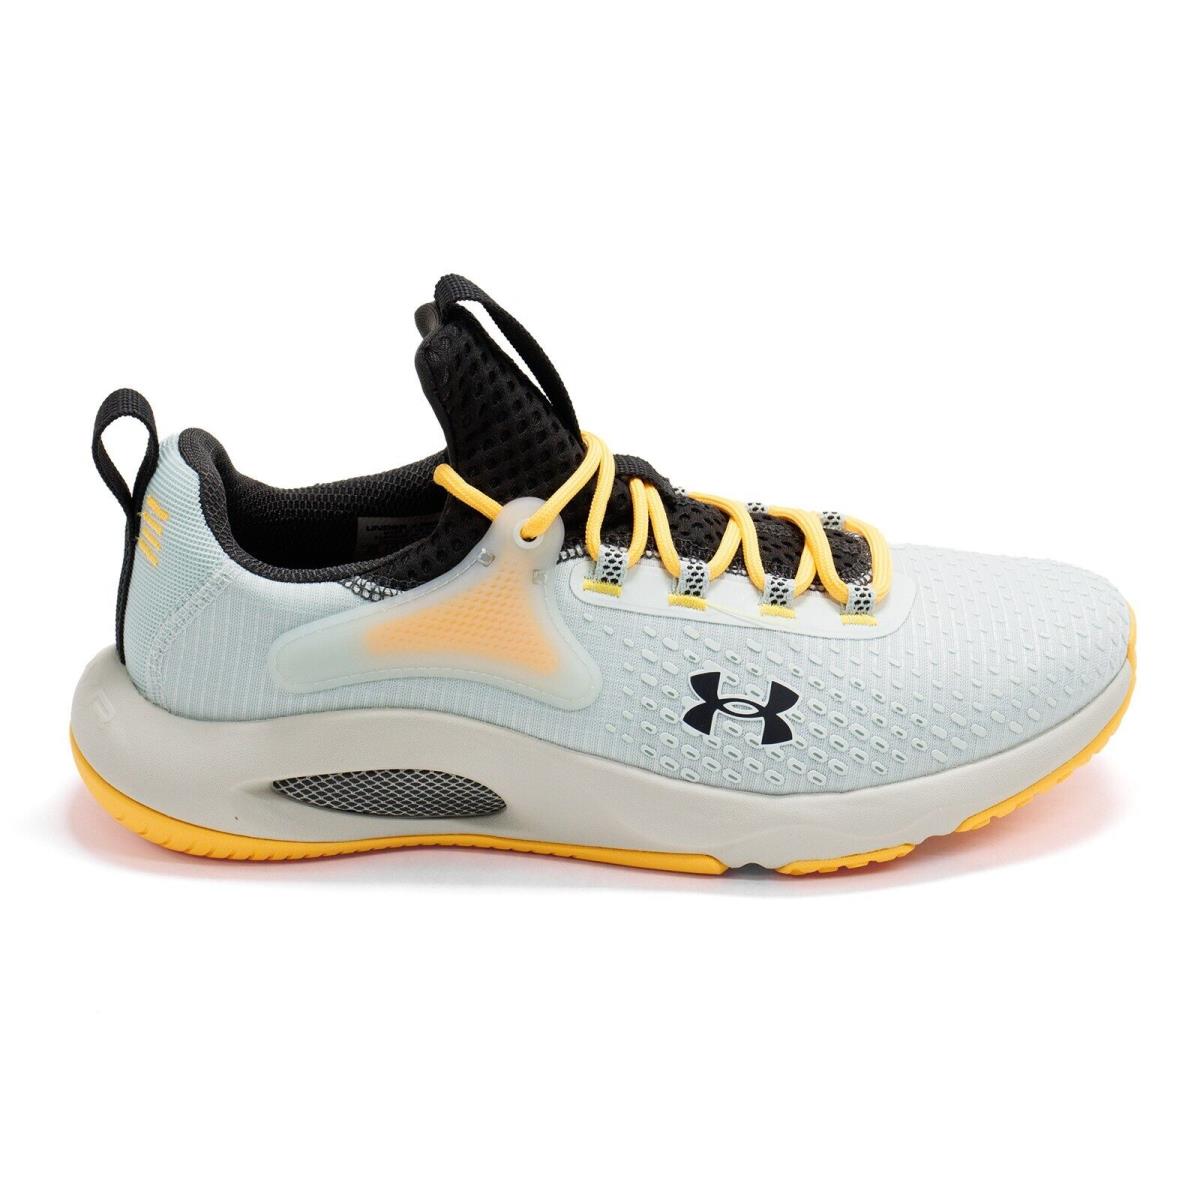 Under Armour Men`s Hovr Rise 4 Training Sneakers